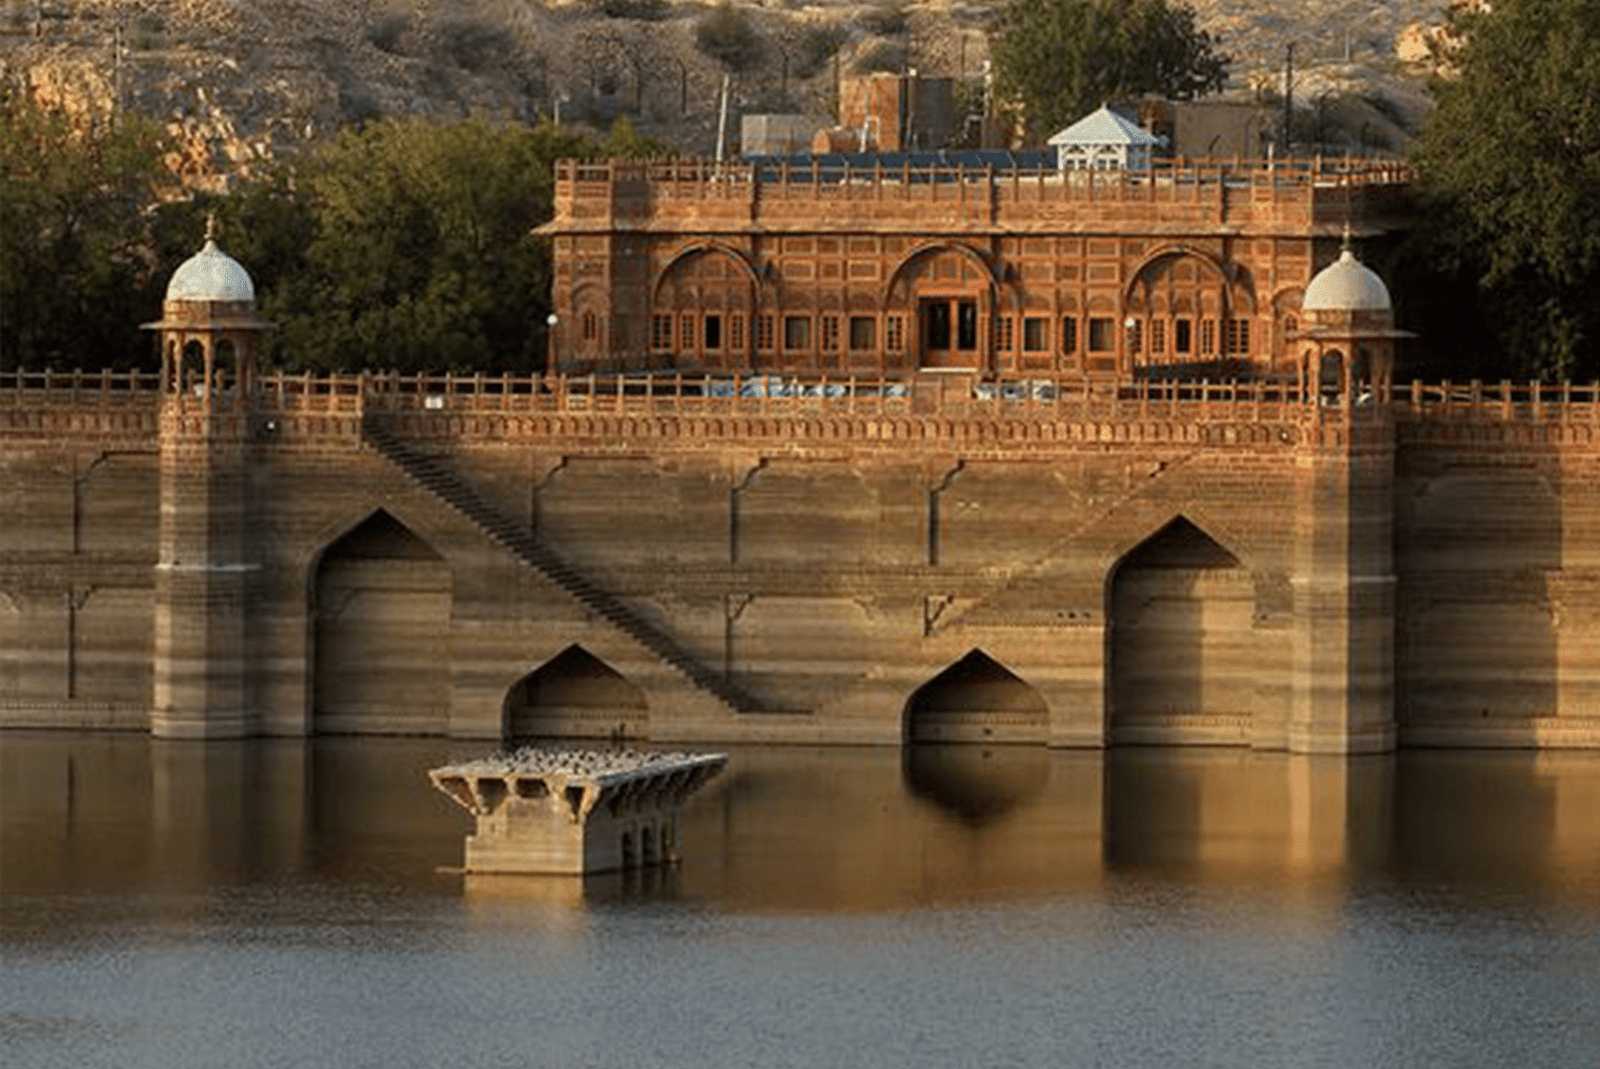 Best Places to visit in Jodhpur